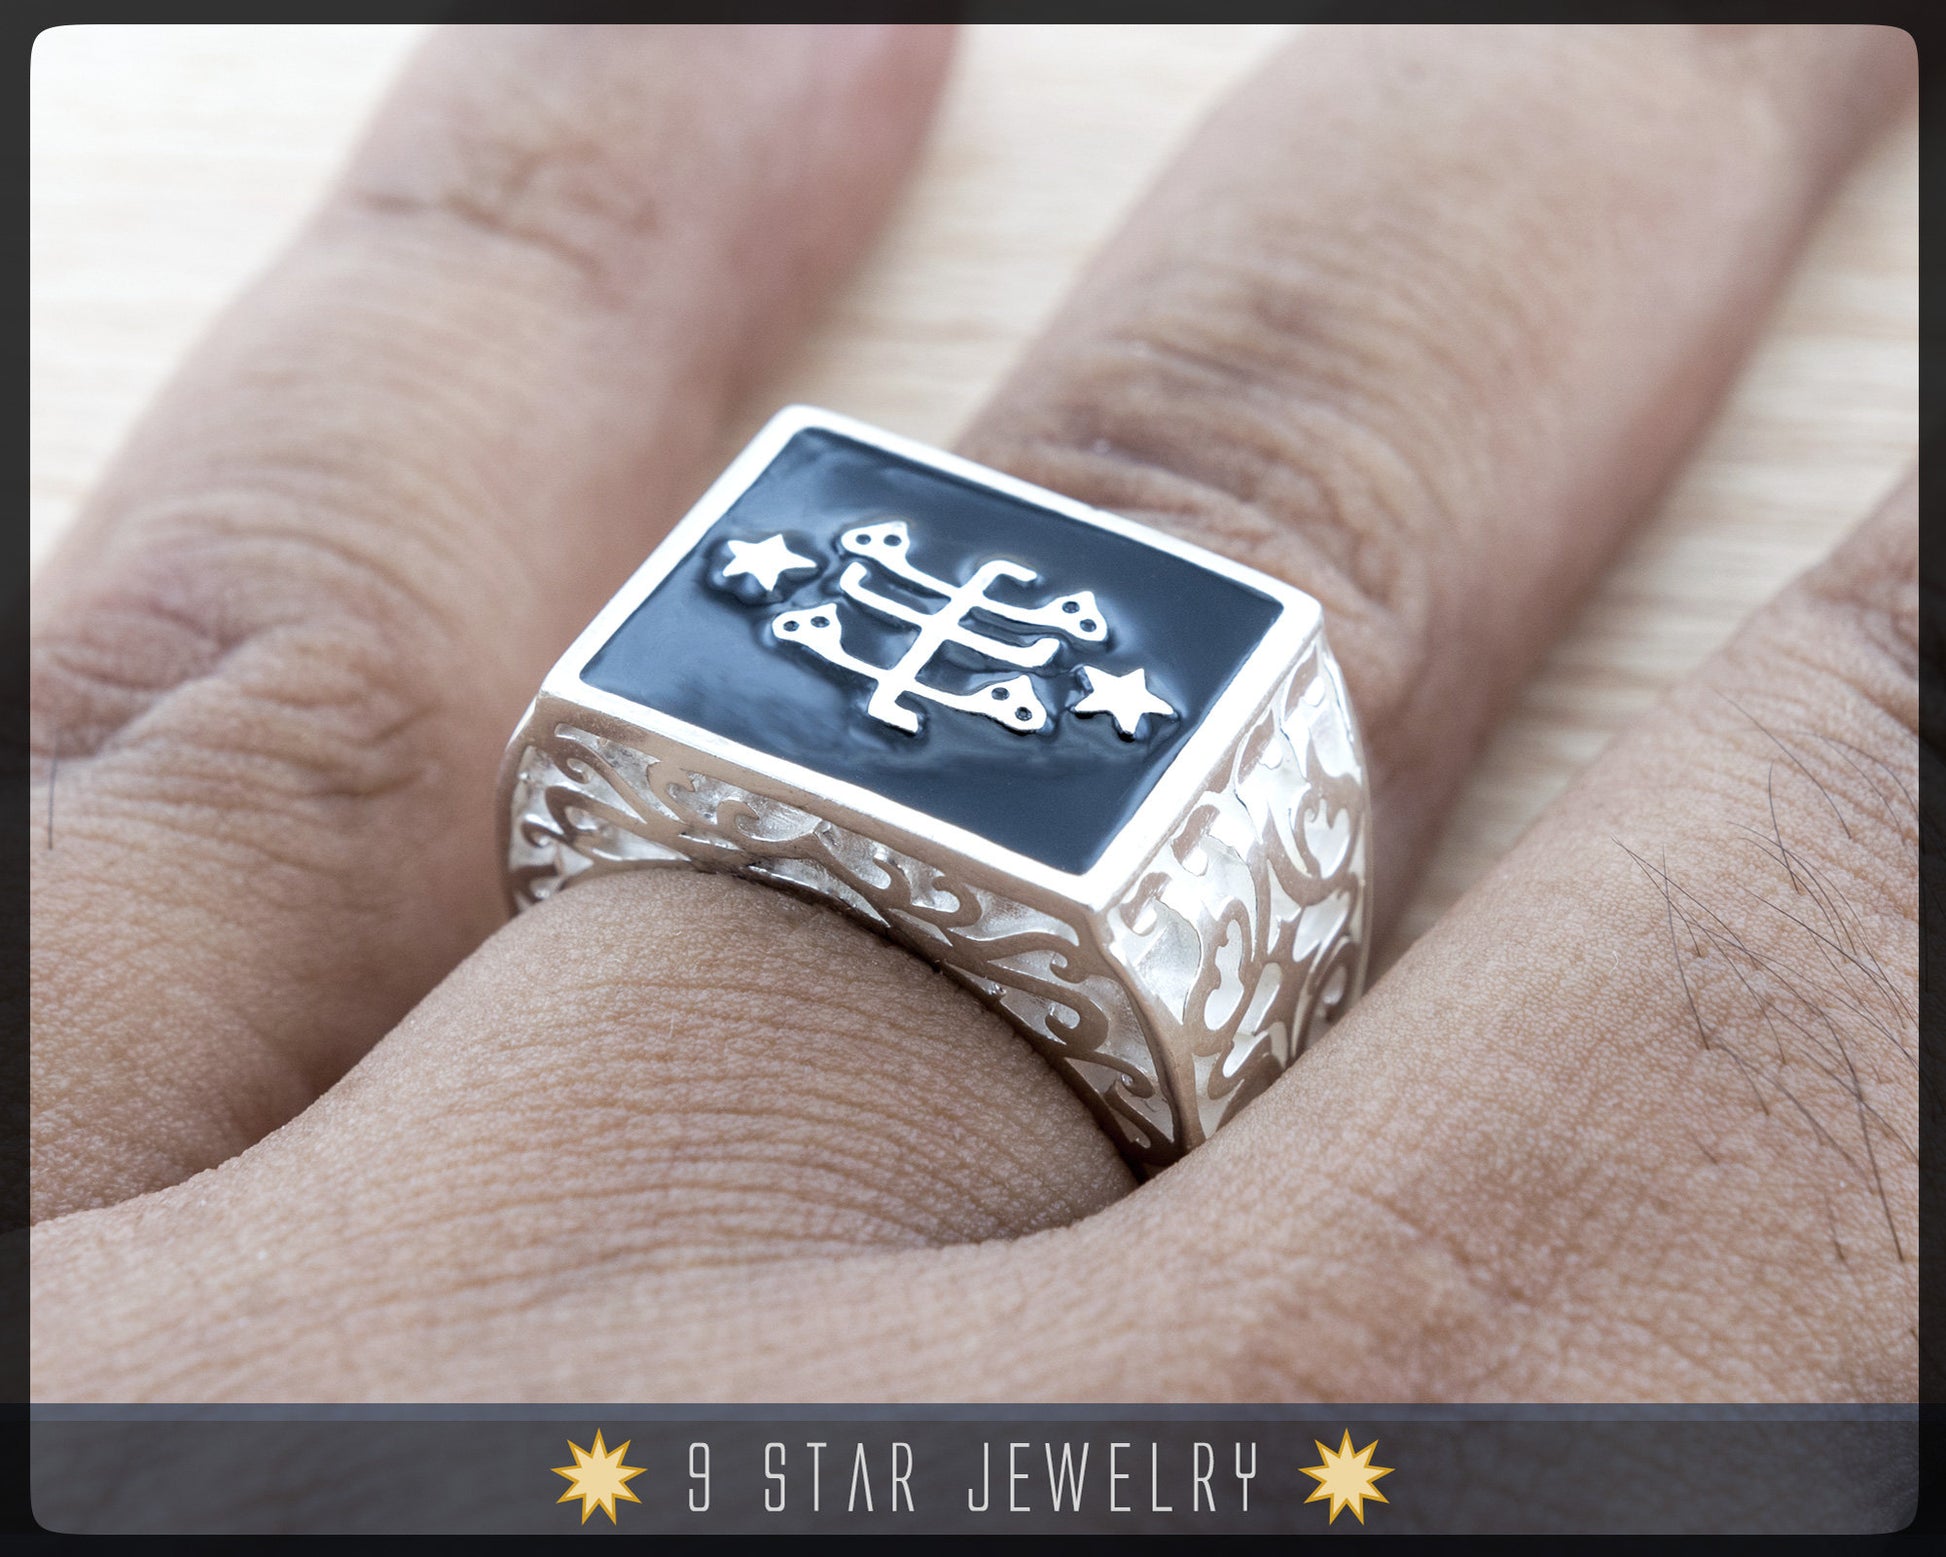 Statement Ring Ring of Declaration with Baha'i Ring Stone Symbol: 925  Sterling Silver